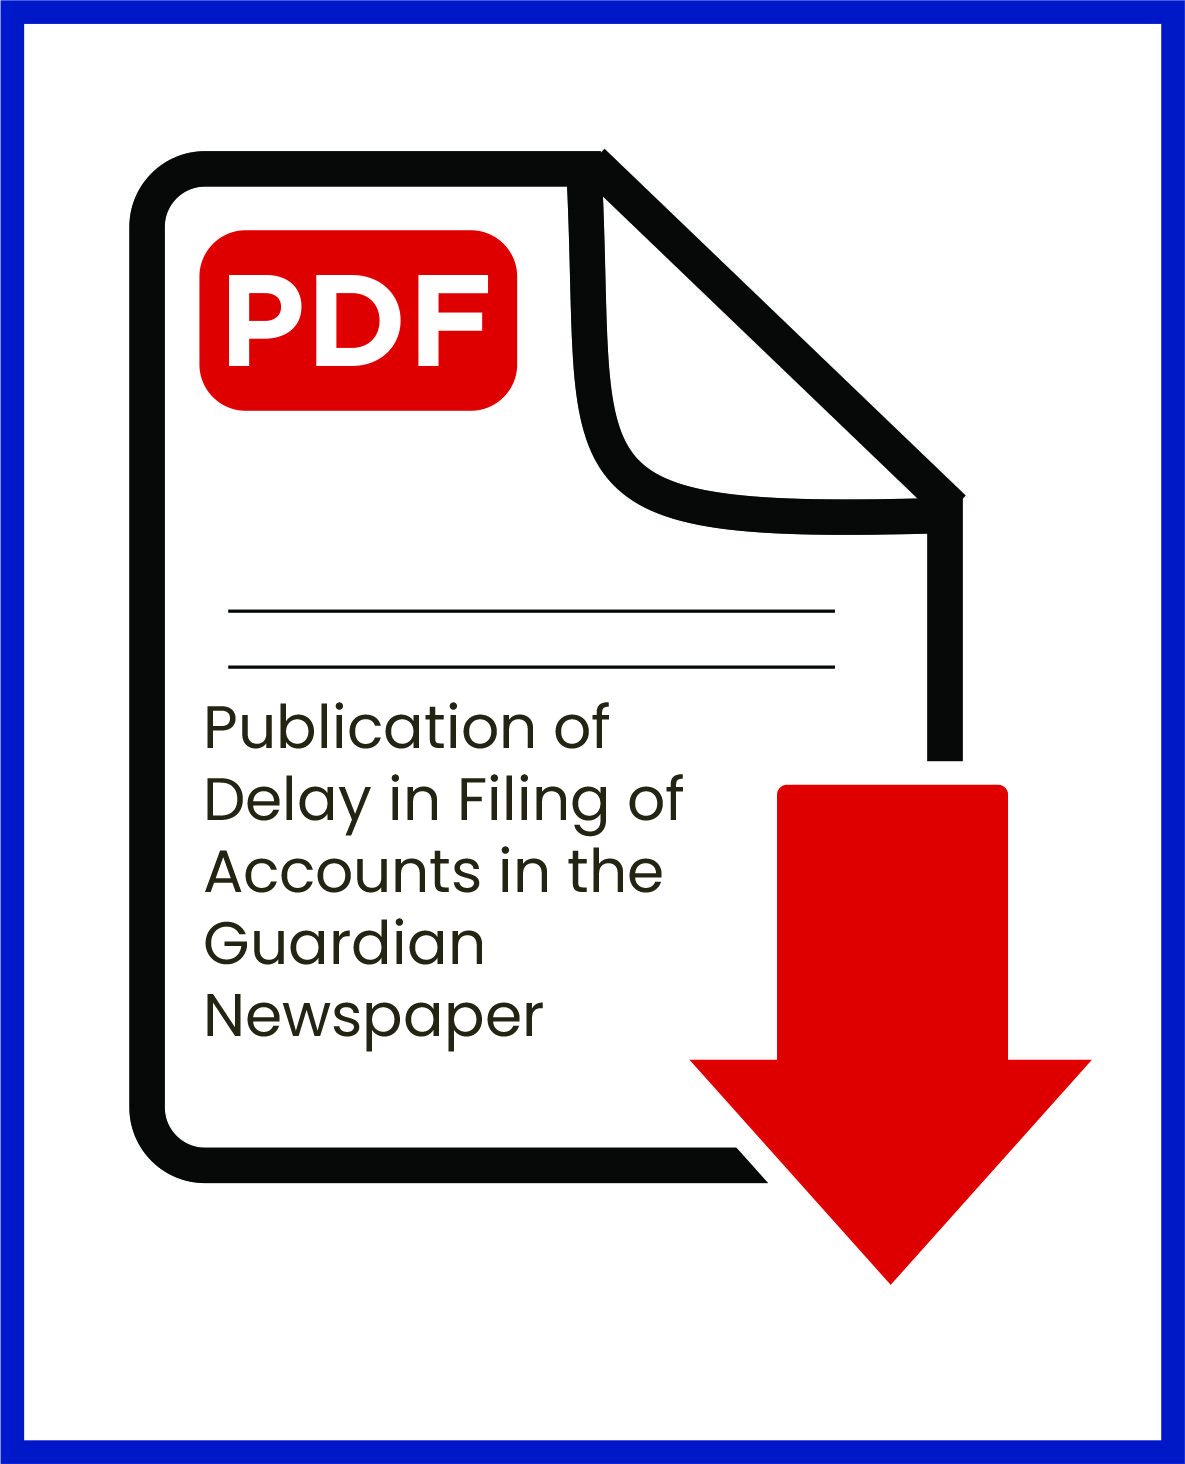 Publication of Delay in Filing of Accounts in the Guardian Newspaper